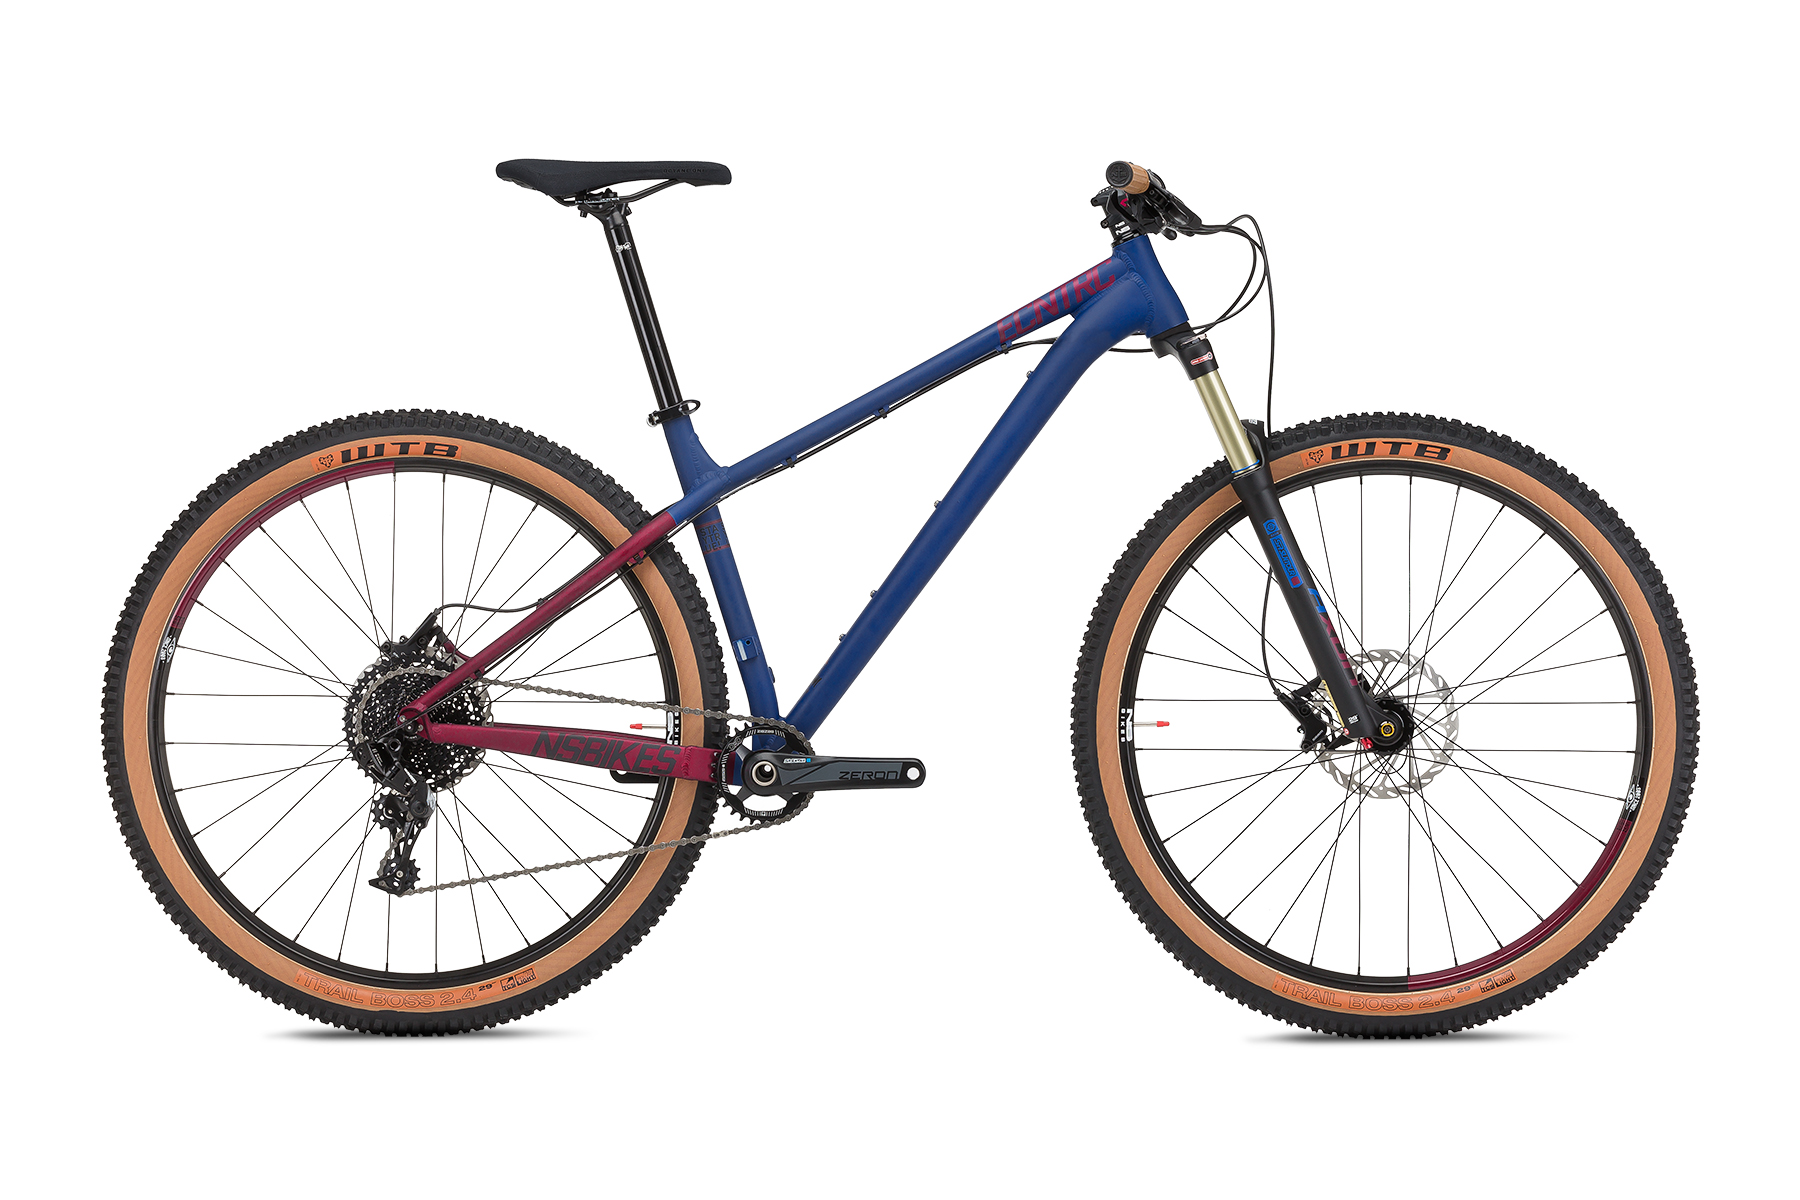 The Extreme Geometry Hardtail 